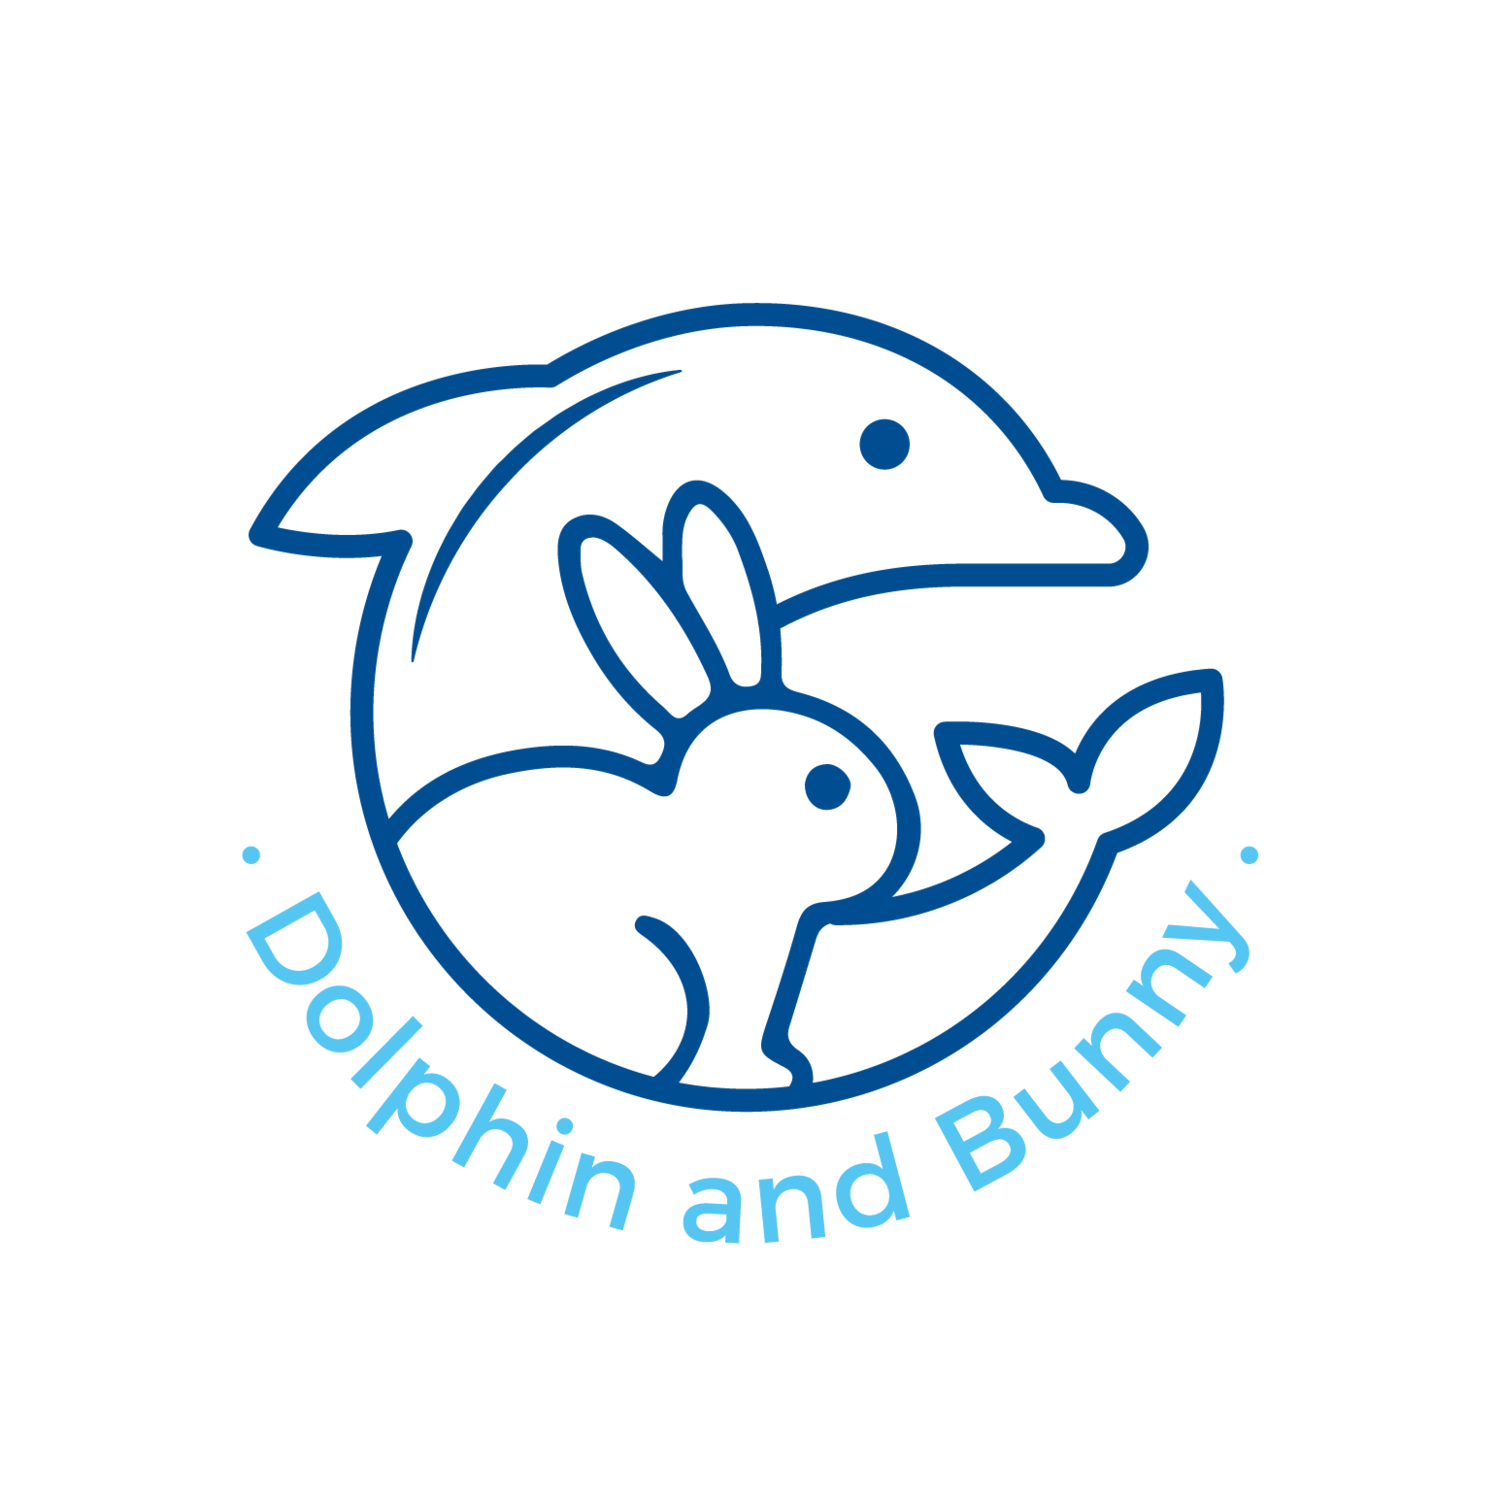 Dolphin and Bunny